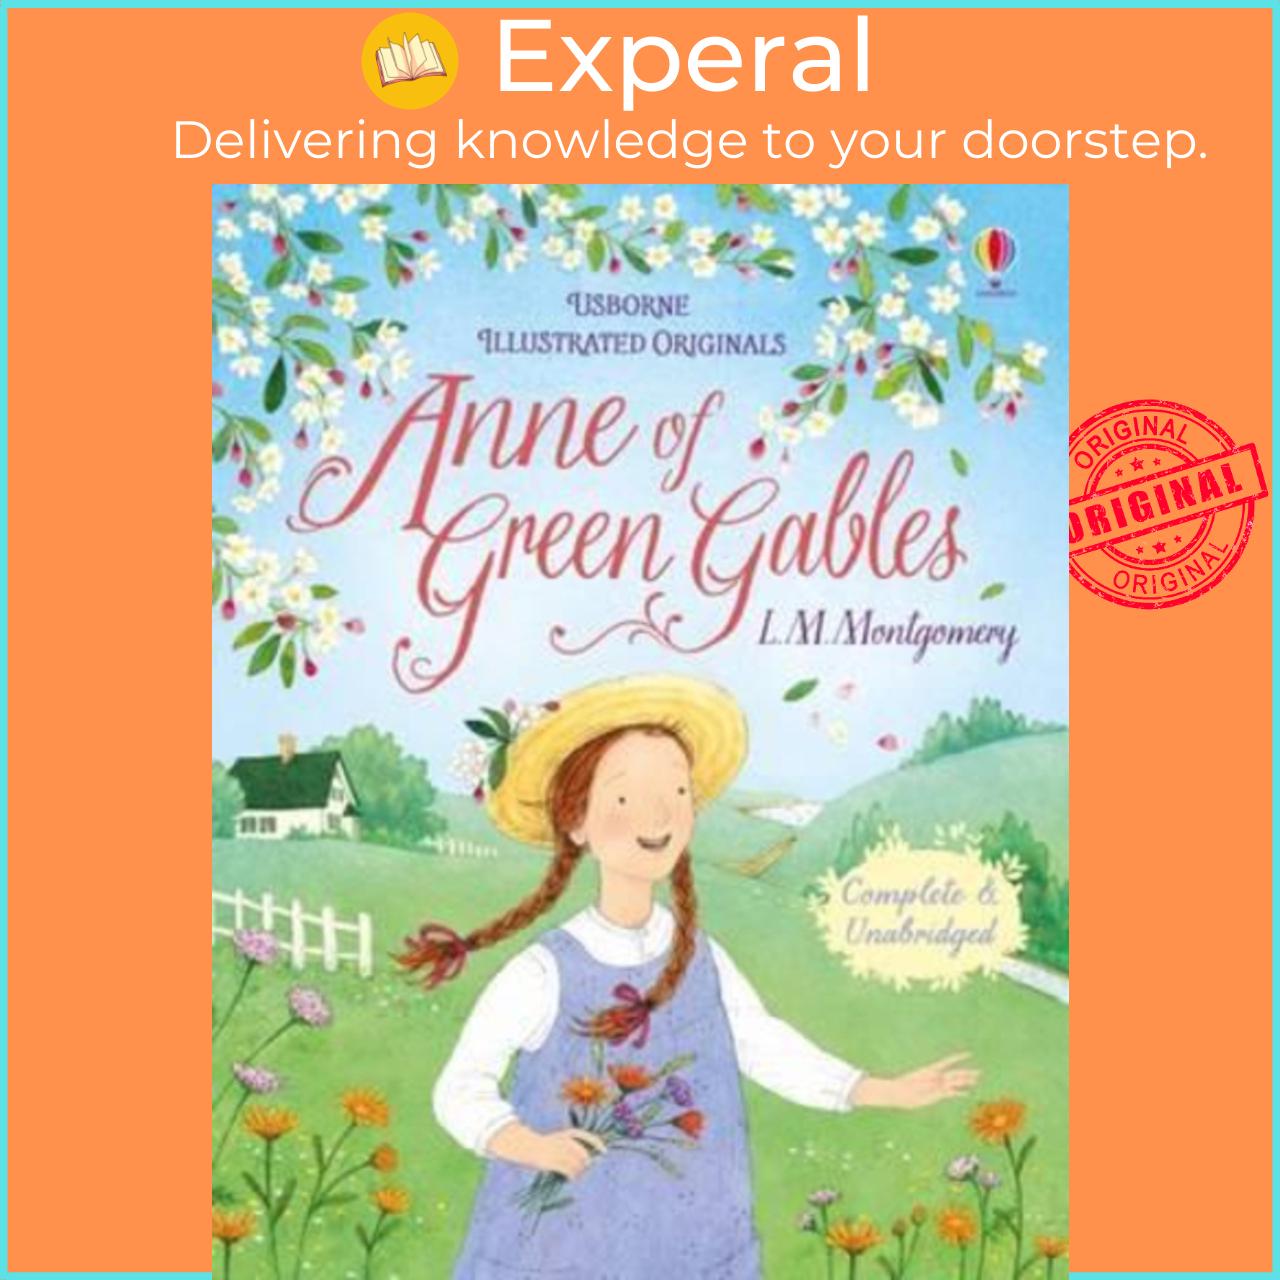 Sách - Anne of Green Gables (Illustrated Originals) by L. M. Montgomery (UK edition, hardcover)